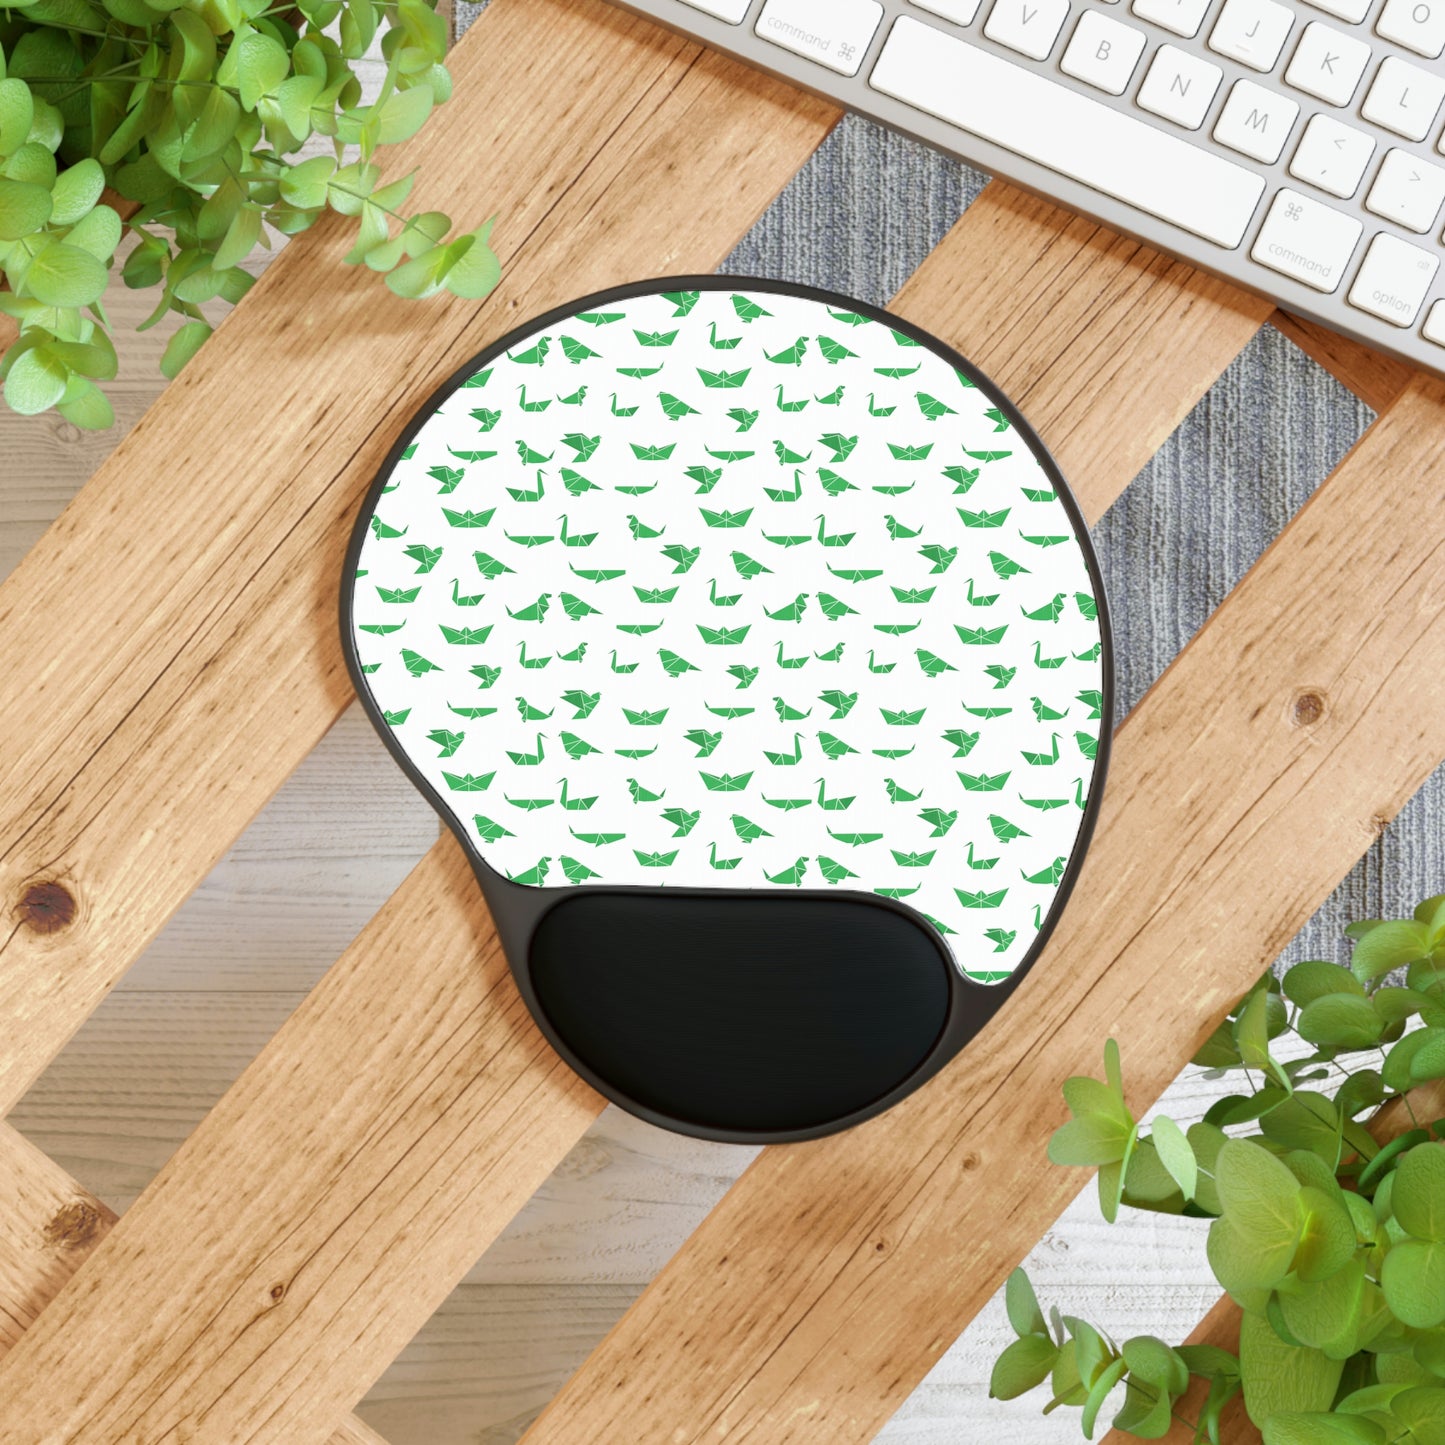 Origami - Mouse Pad With Memory Foam Wrist Rest - home • office • health